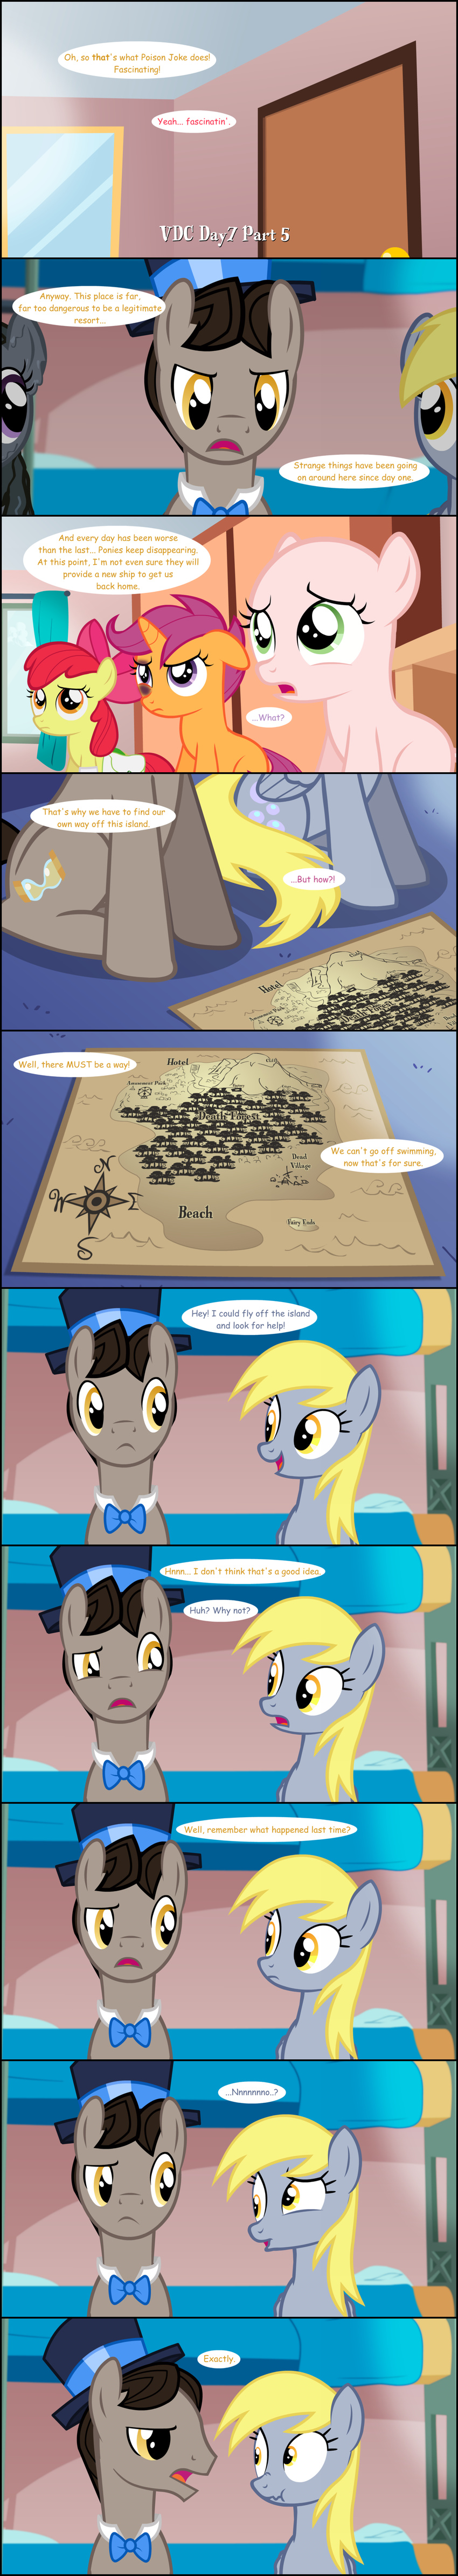 bald comic cutie_mark_crusaders_(mlp) derpy_hooves_(mlp) doctor_whooves_(mlp) equine female feral friendship_is_magic horn horse inkie_pie_(mlp) jananimations mammal map my_little_pony pegasus poison_joke pony scootaloo_(mlp) shiner shocked sweetie_belle_(mlp) tumblr unicorn wings young